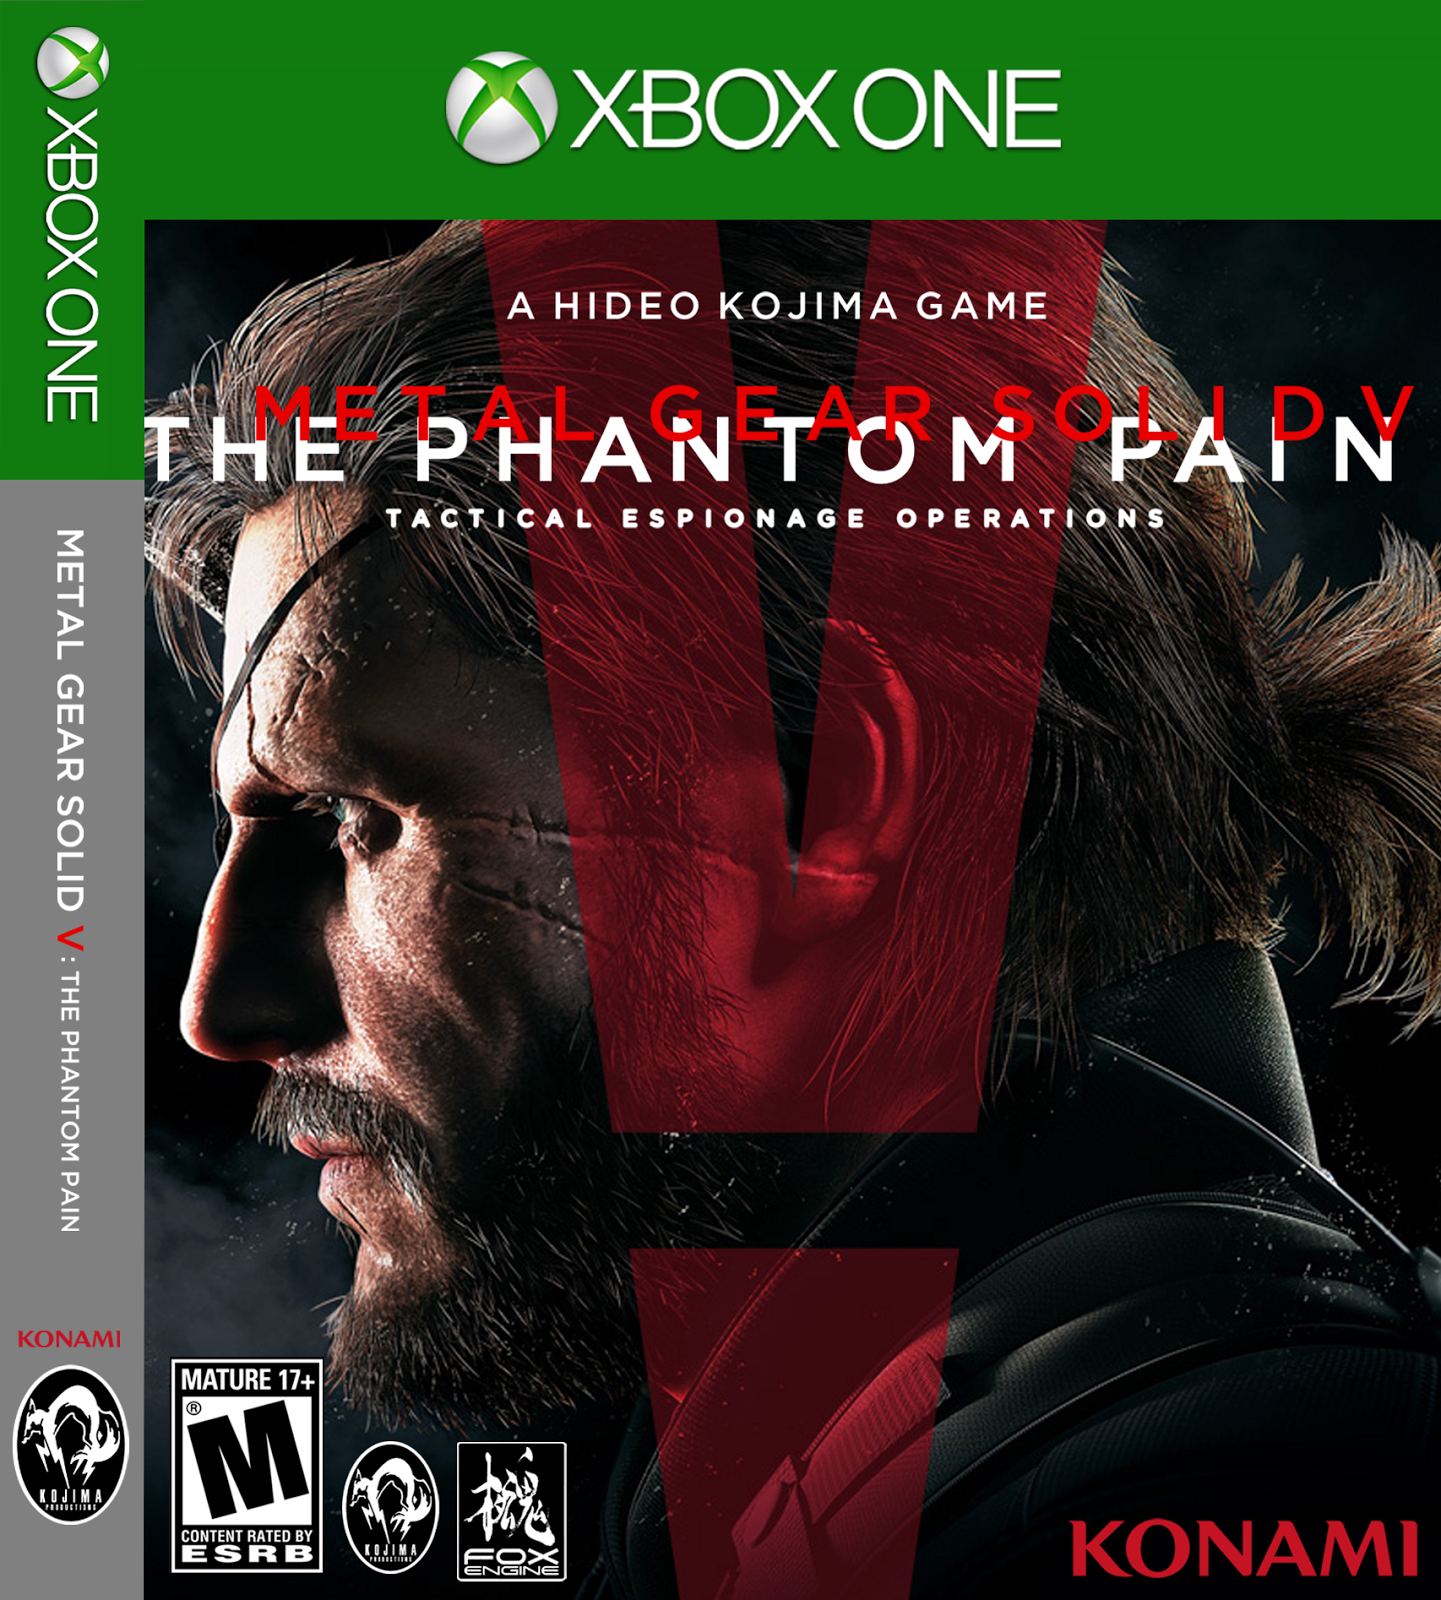 metal gear solid 5 cheats xbox one